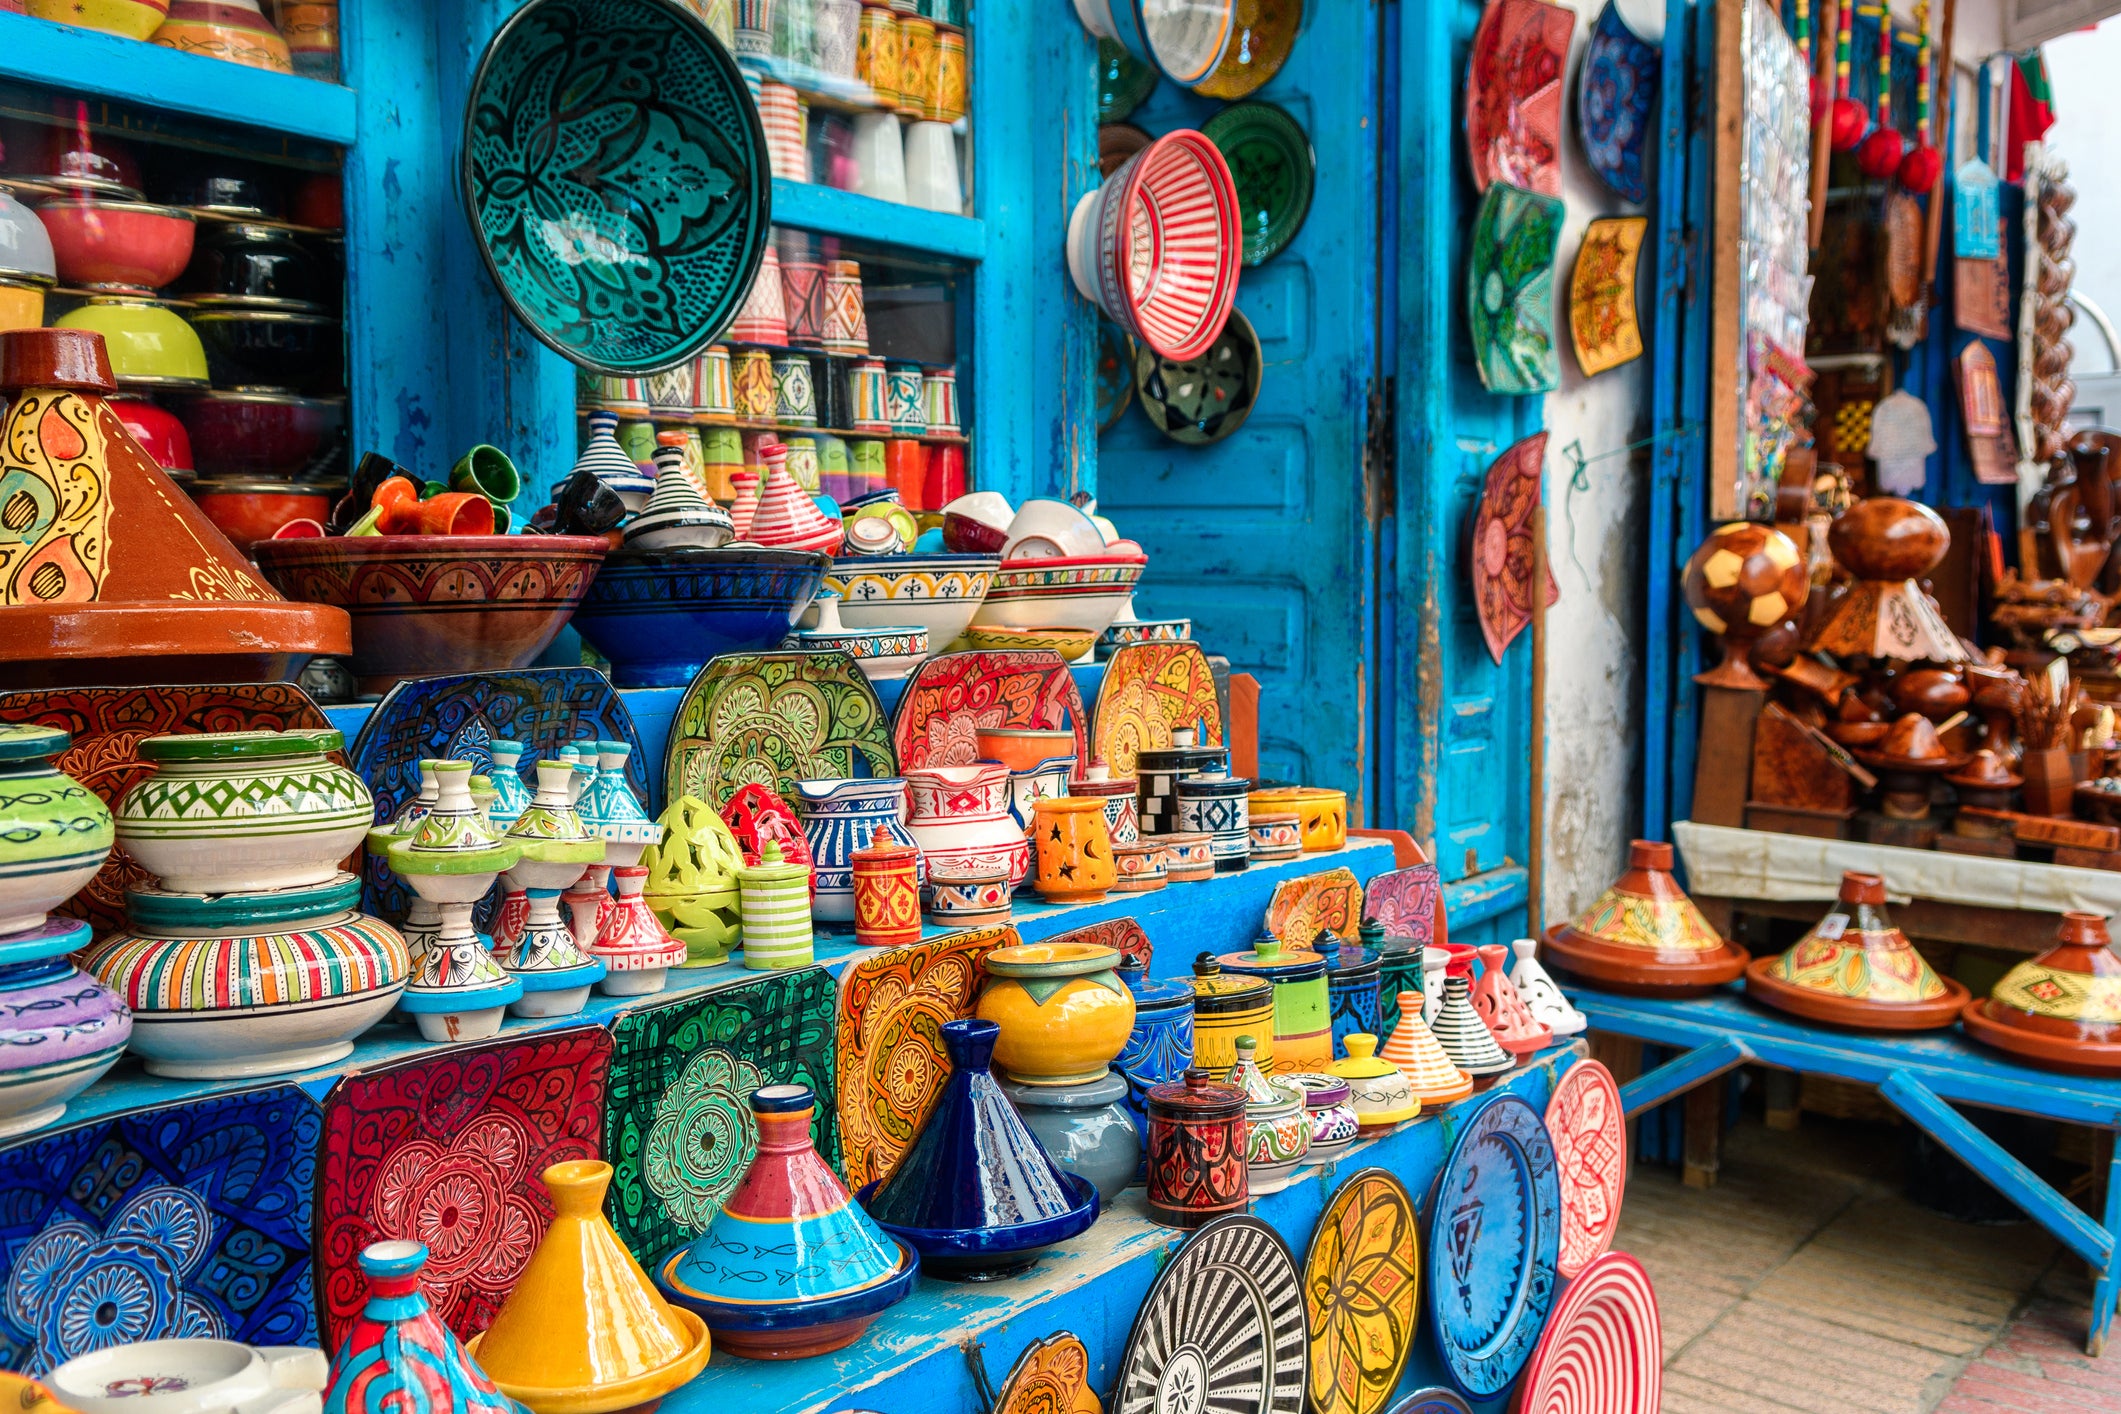 Dynamic, multicolour landscapes in Marrakech inspire budding artists